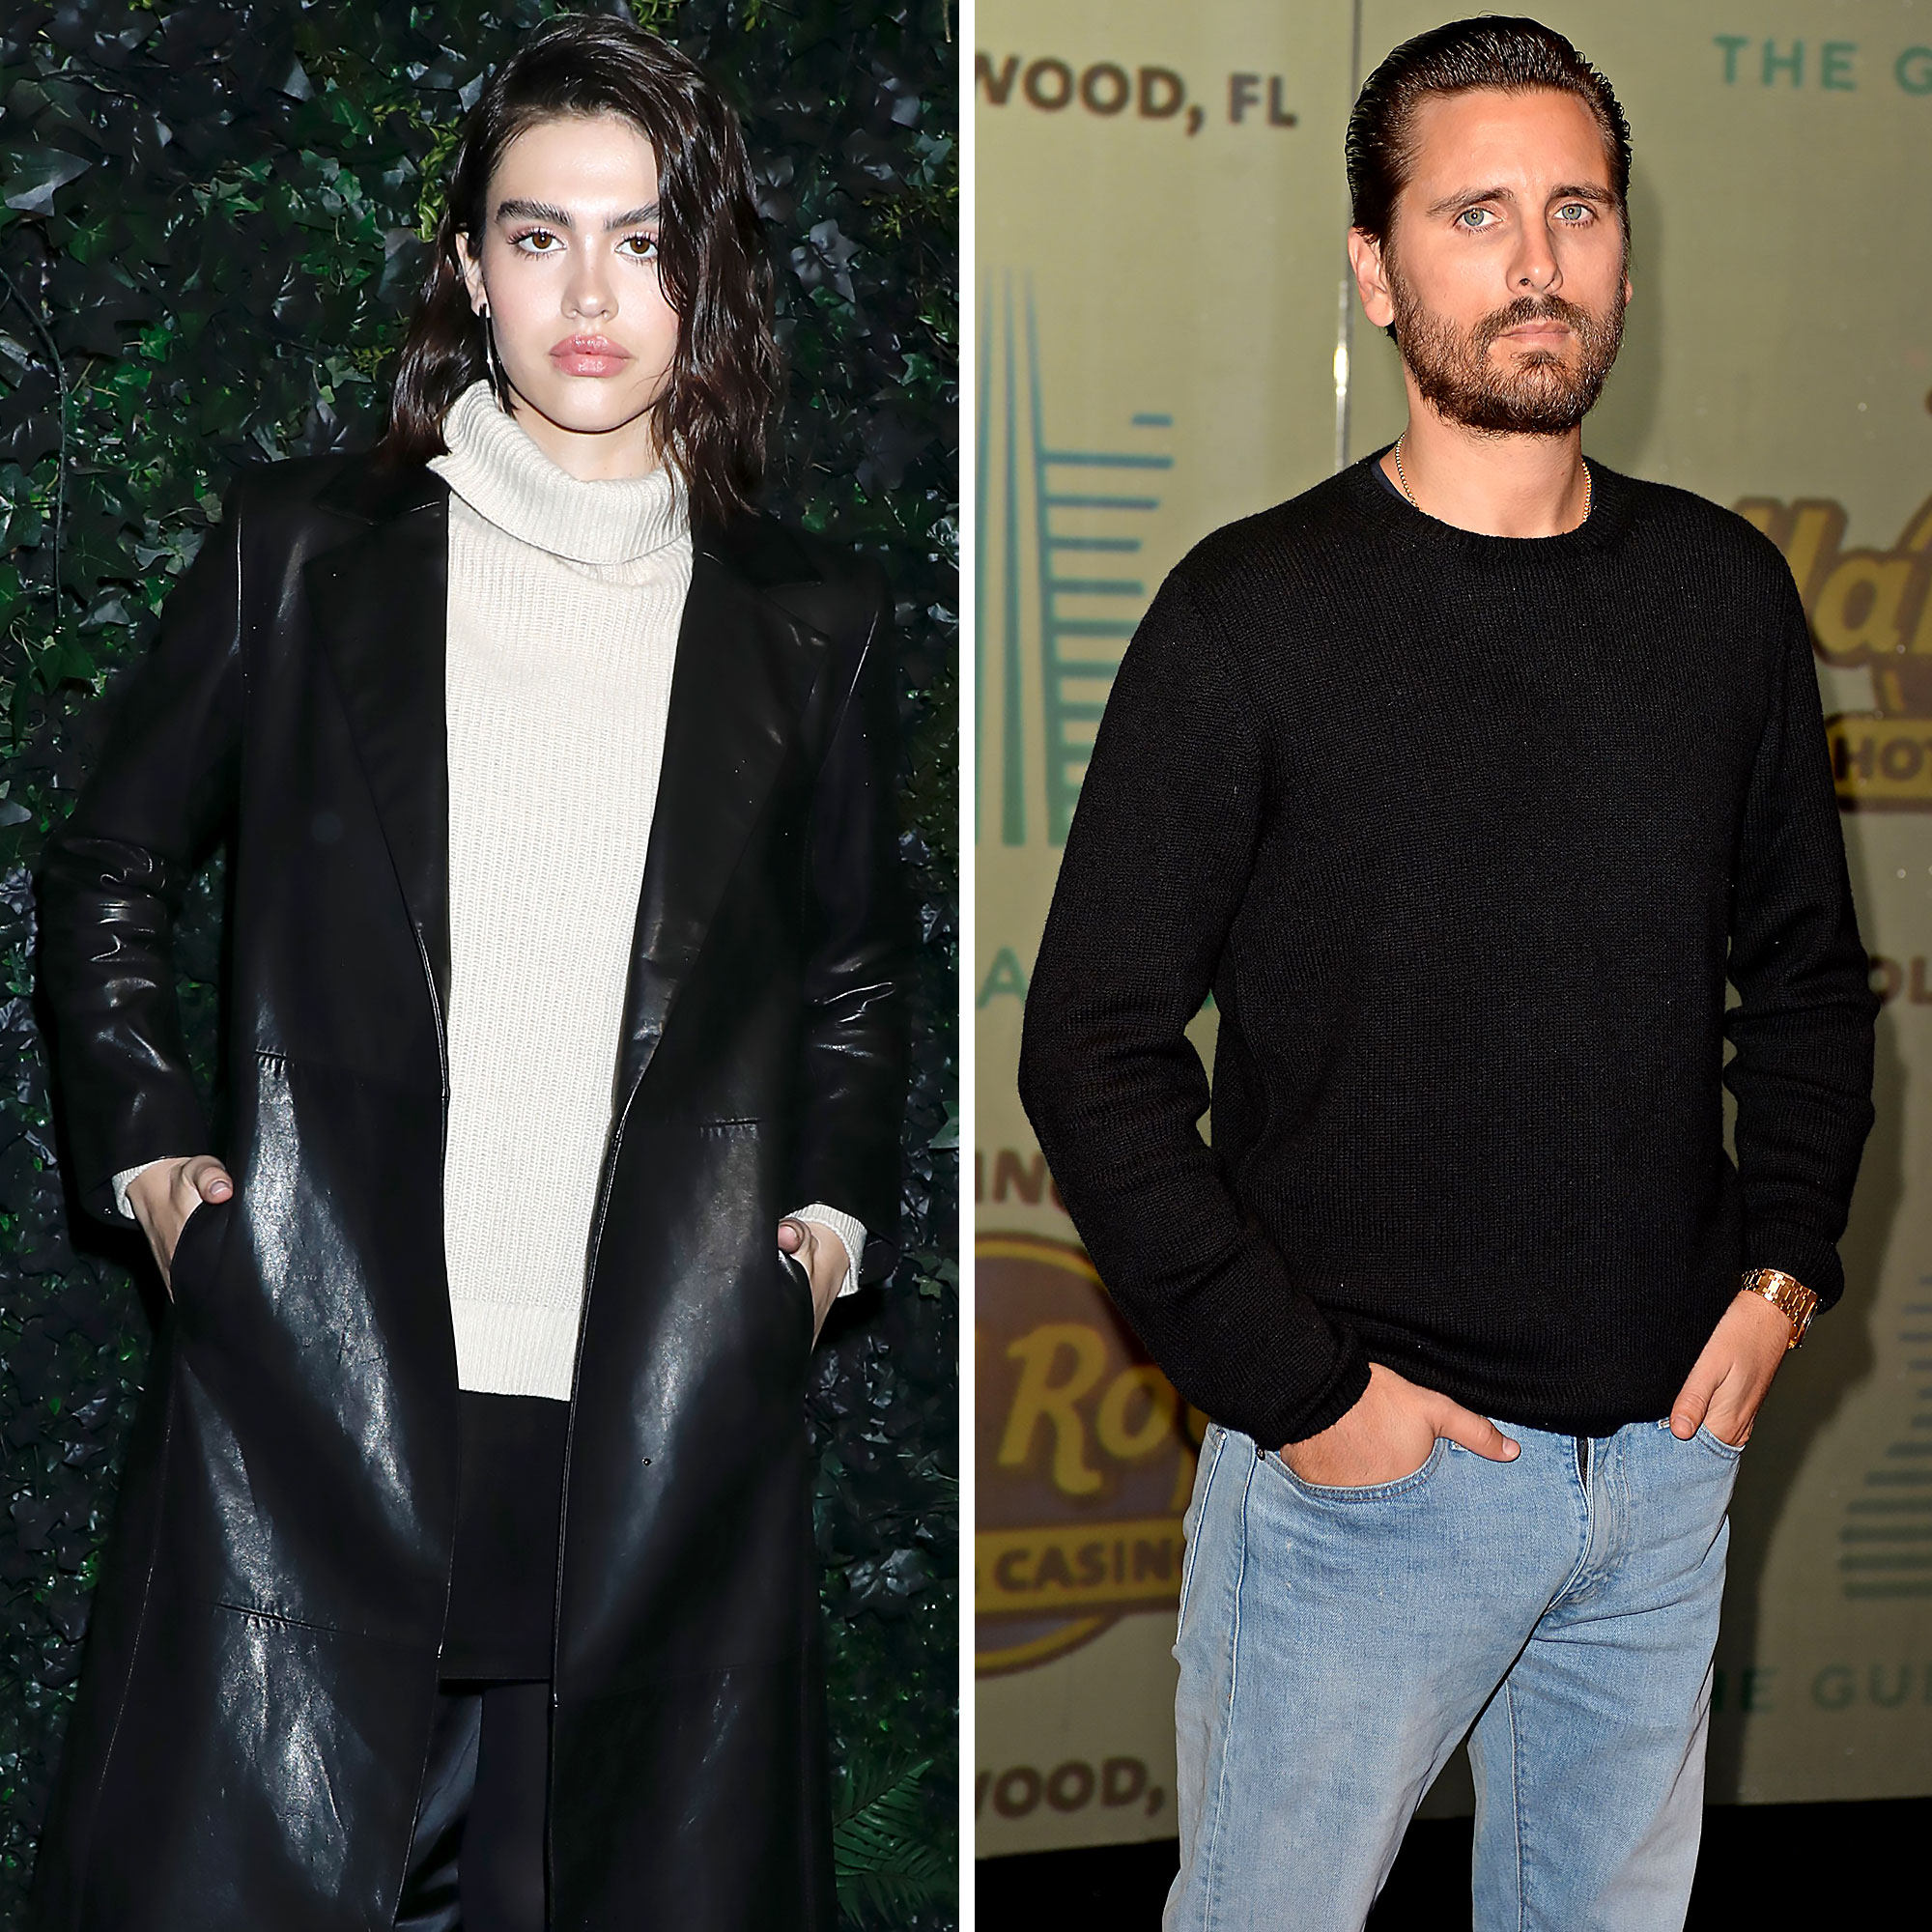 Kendall Jenner Supports Scott Disick by Wearing 'Talentless